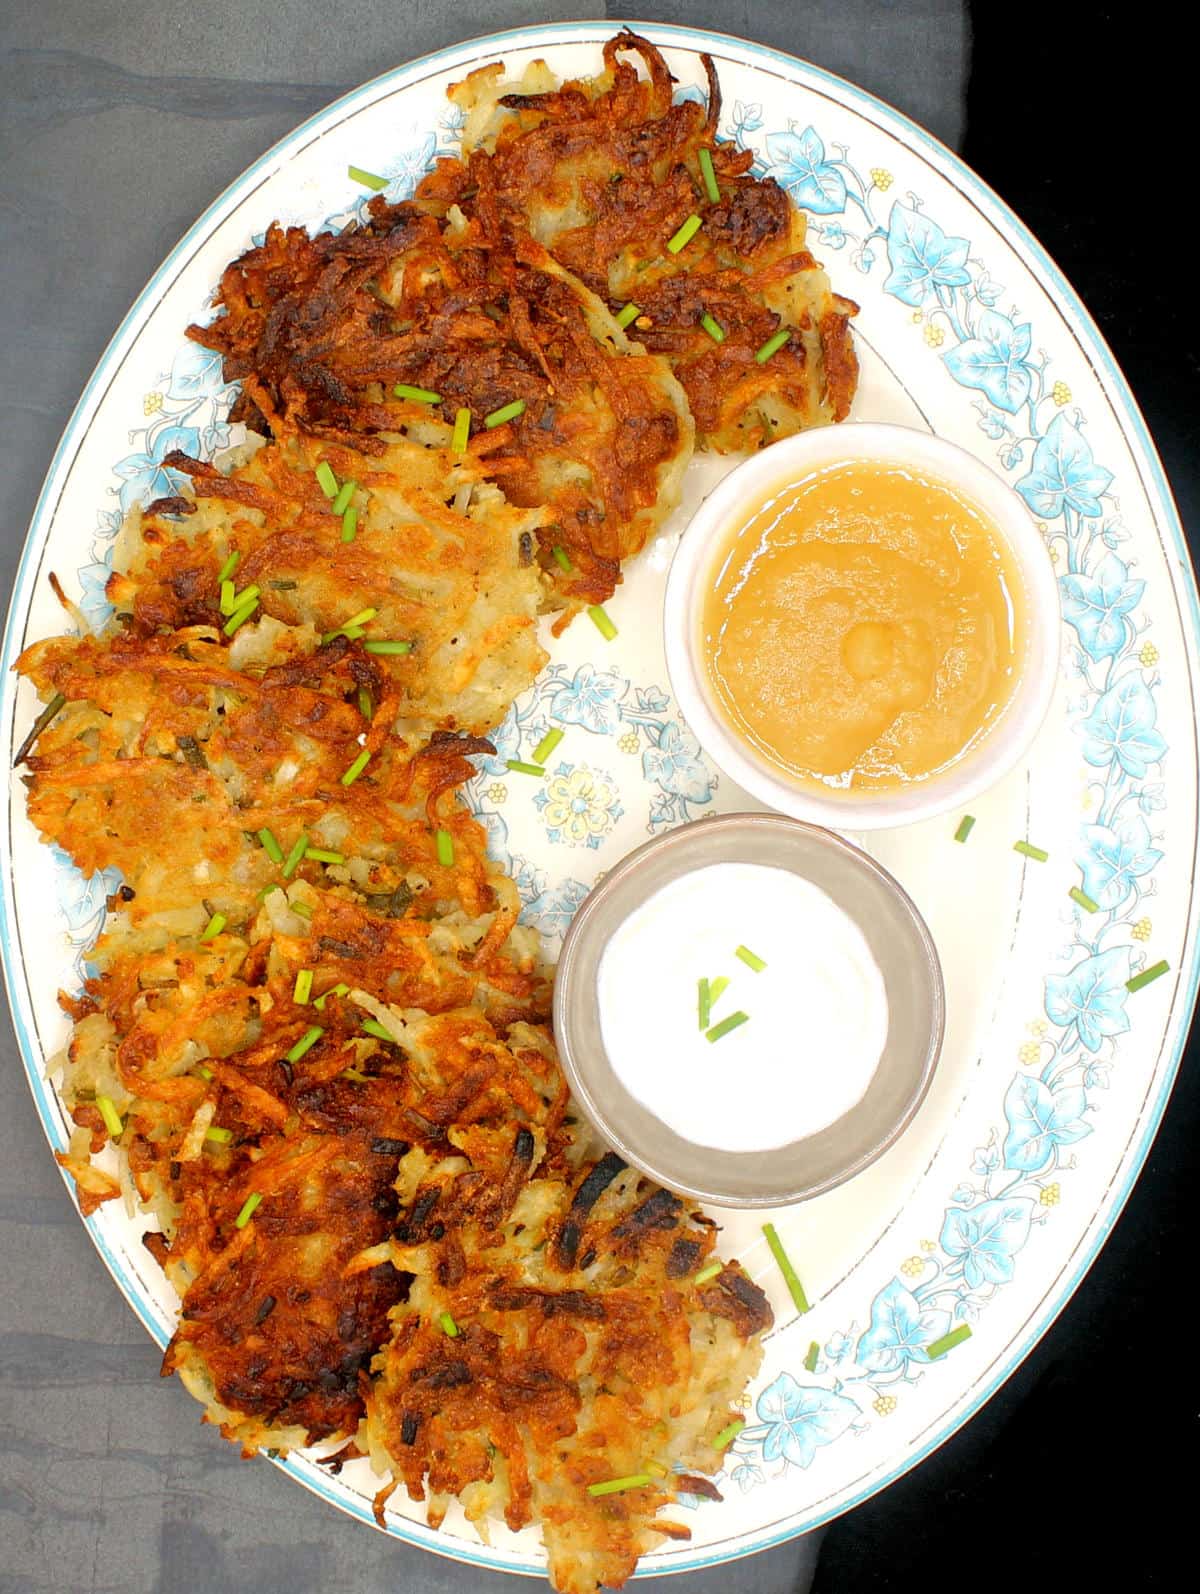 Vegan potato latkes in an oval plate with vegan sour cream and applesauce in bowls.